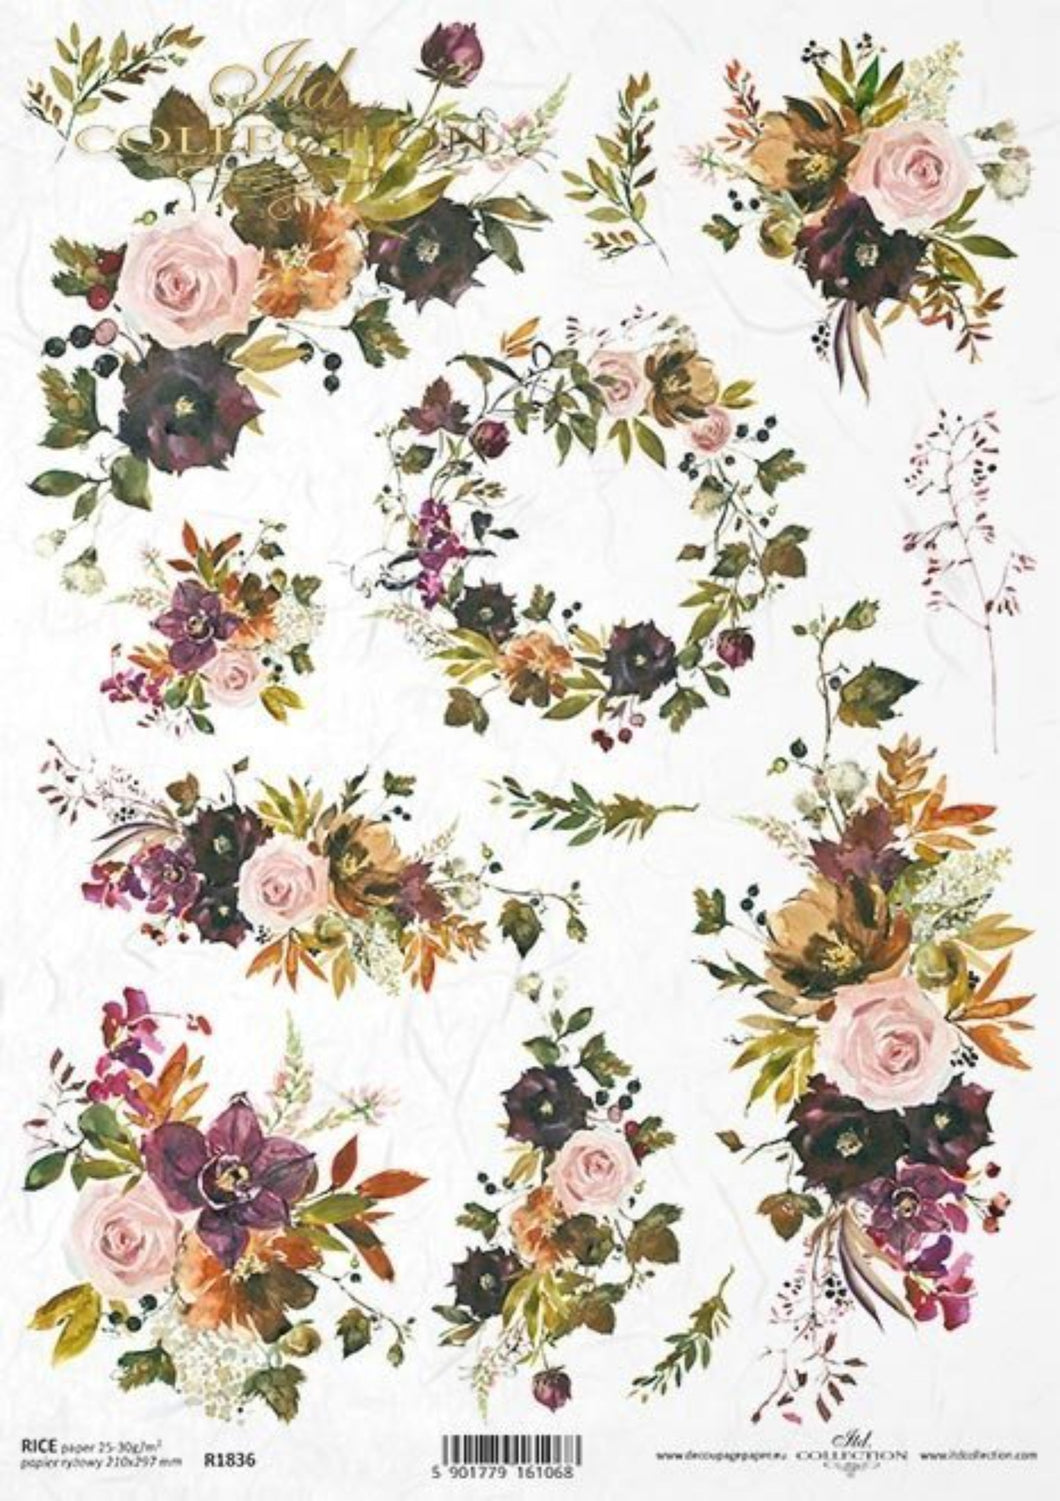  Watecolor Flowers Bouquets Rice Paper by ITD Collection, R1836, A4